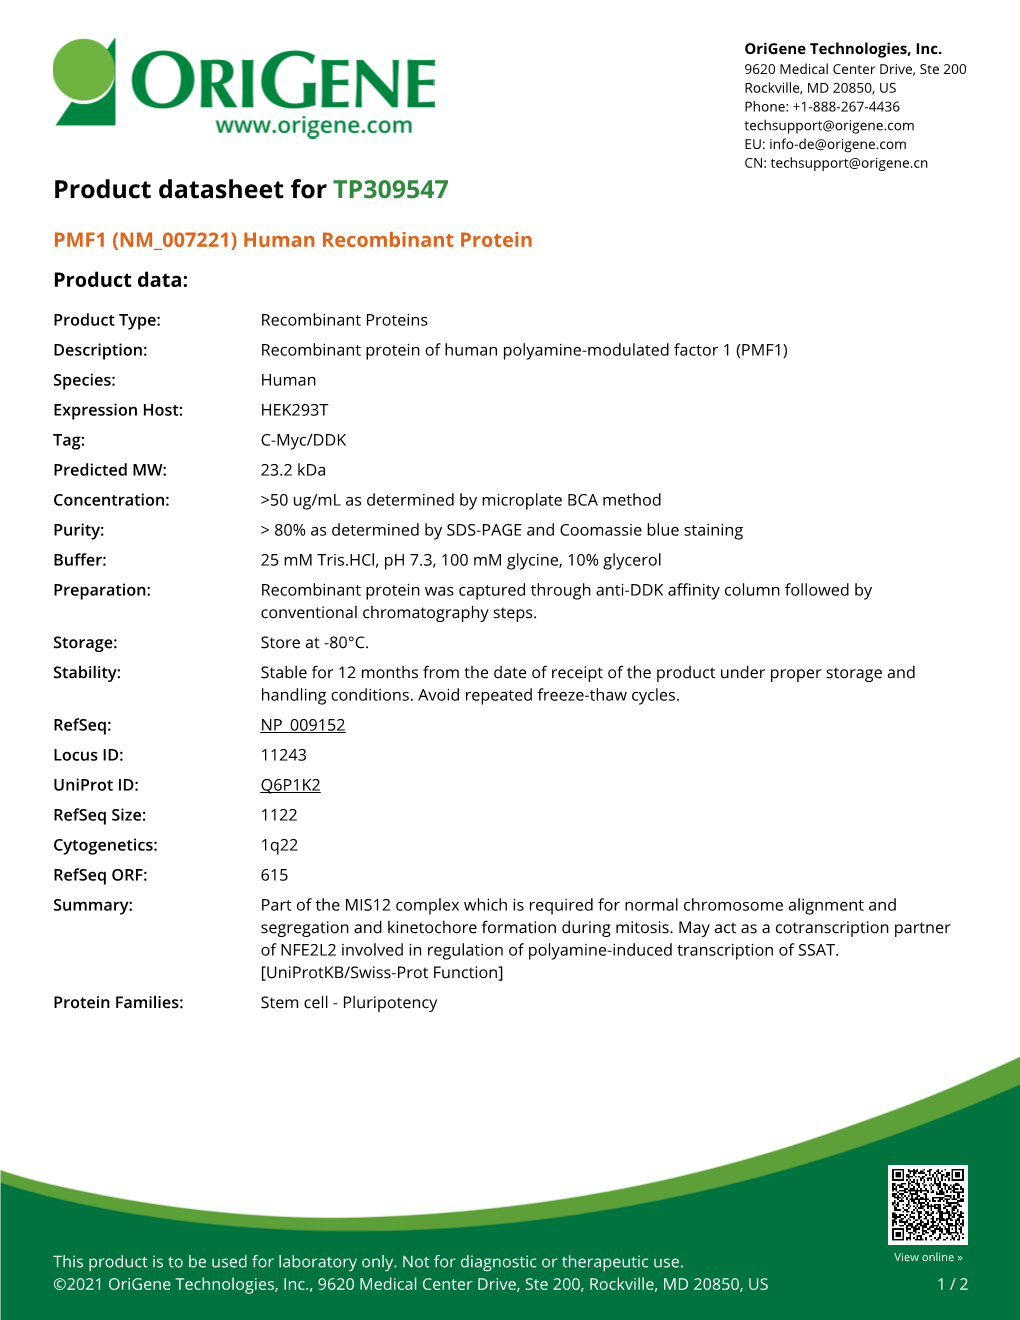 PMF1 (NM 007221) Human Recombinant Protein Product Data